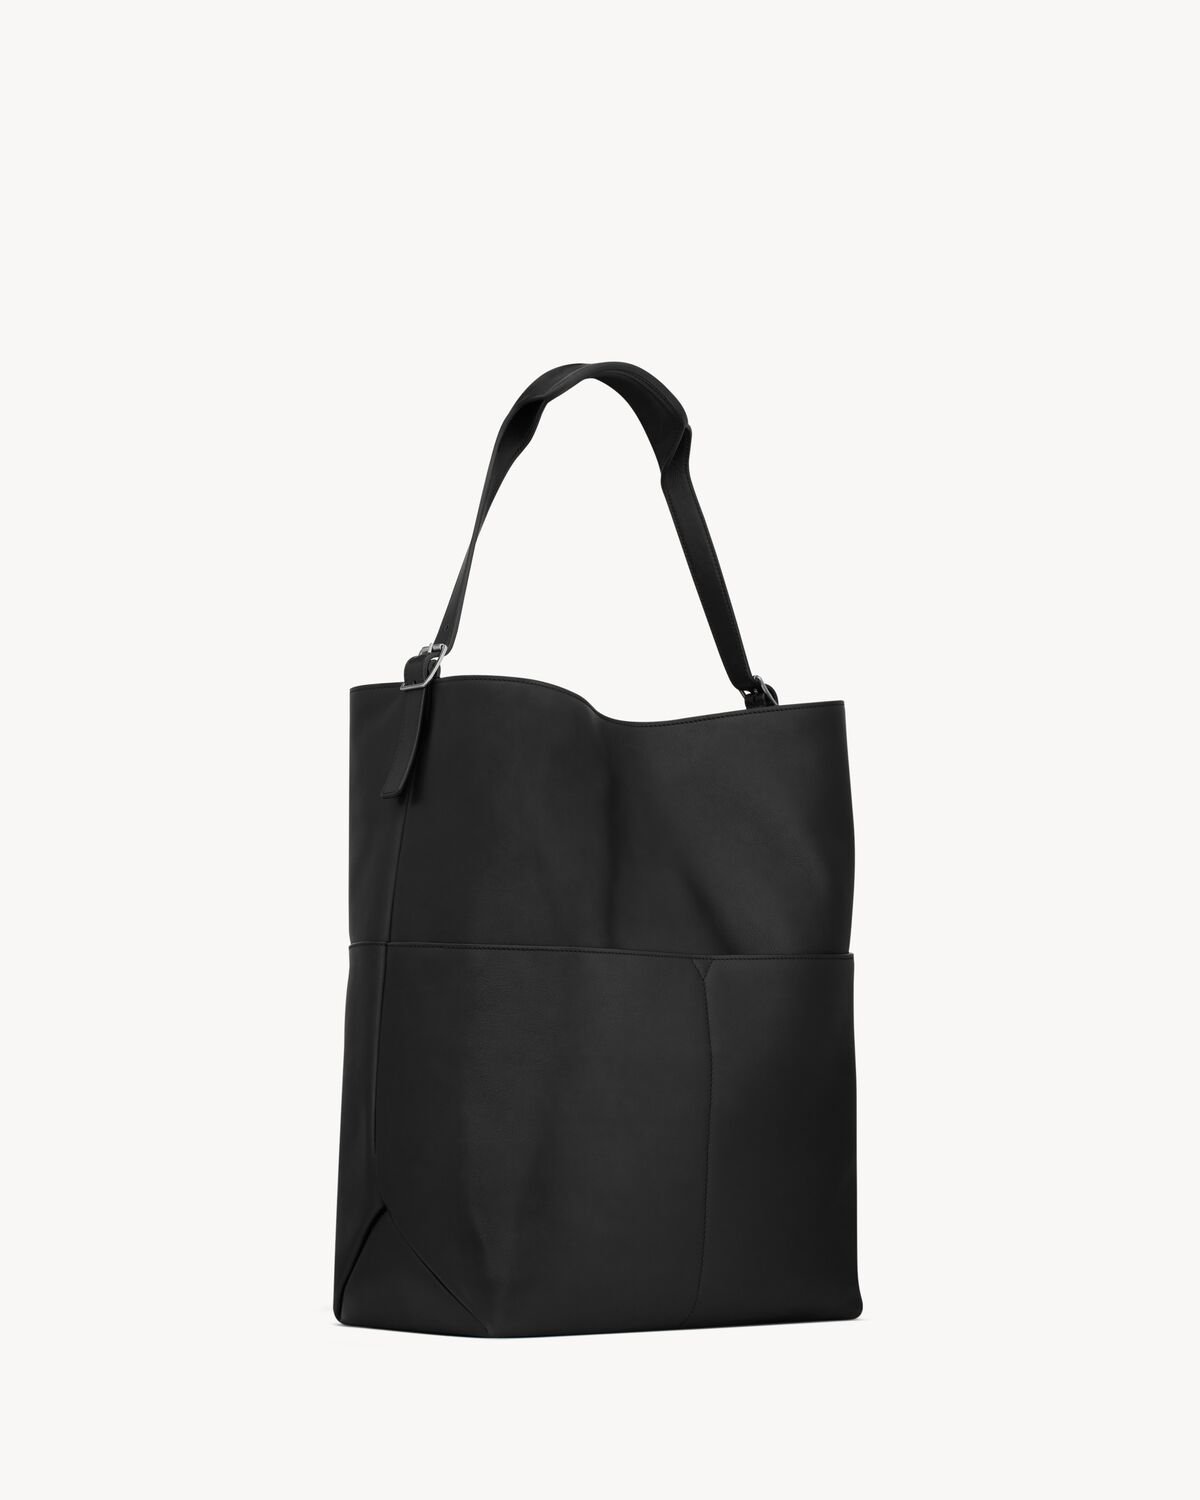 SAINT LAURENT PARIS long tote in smooth leather